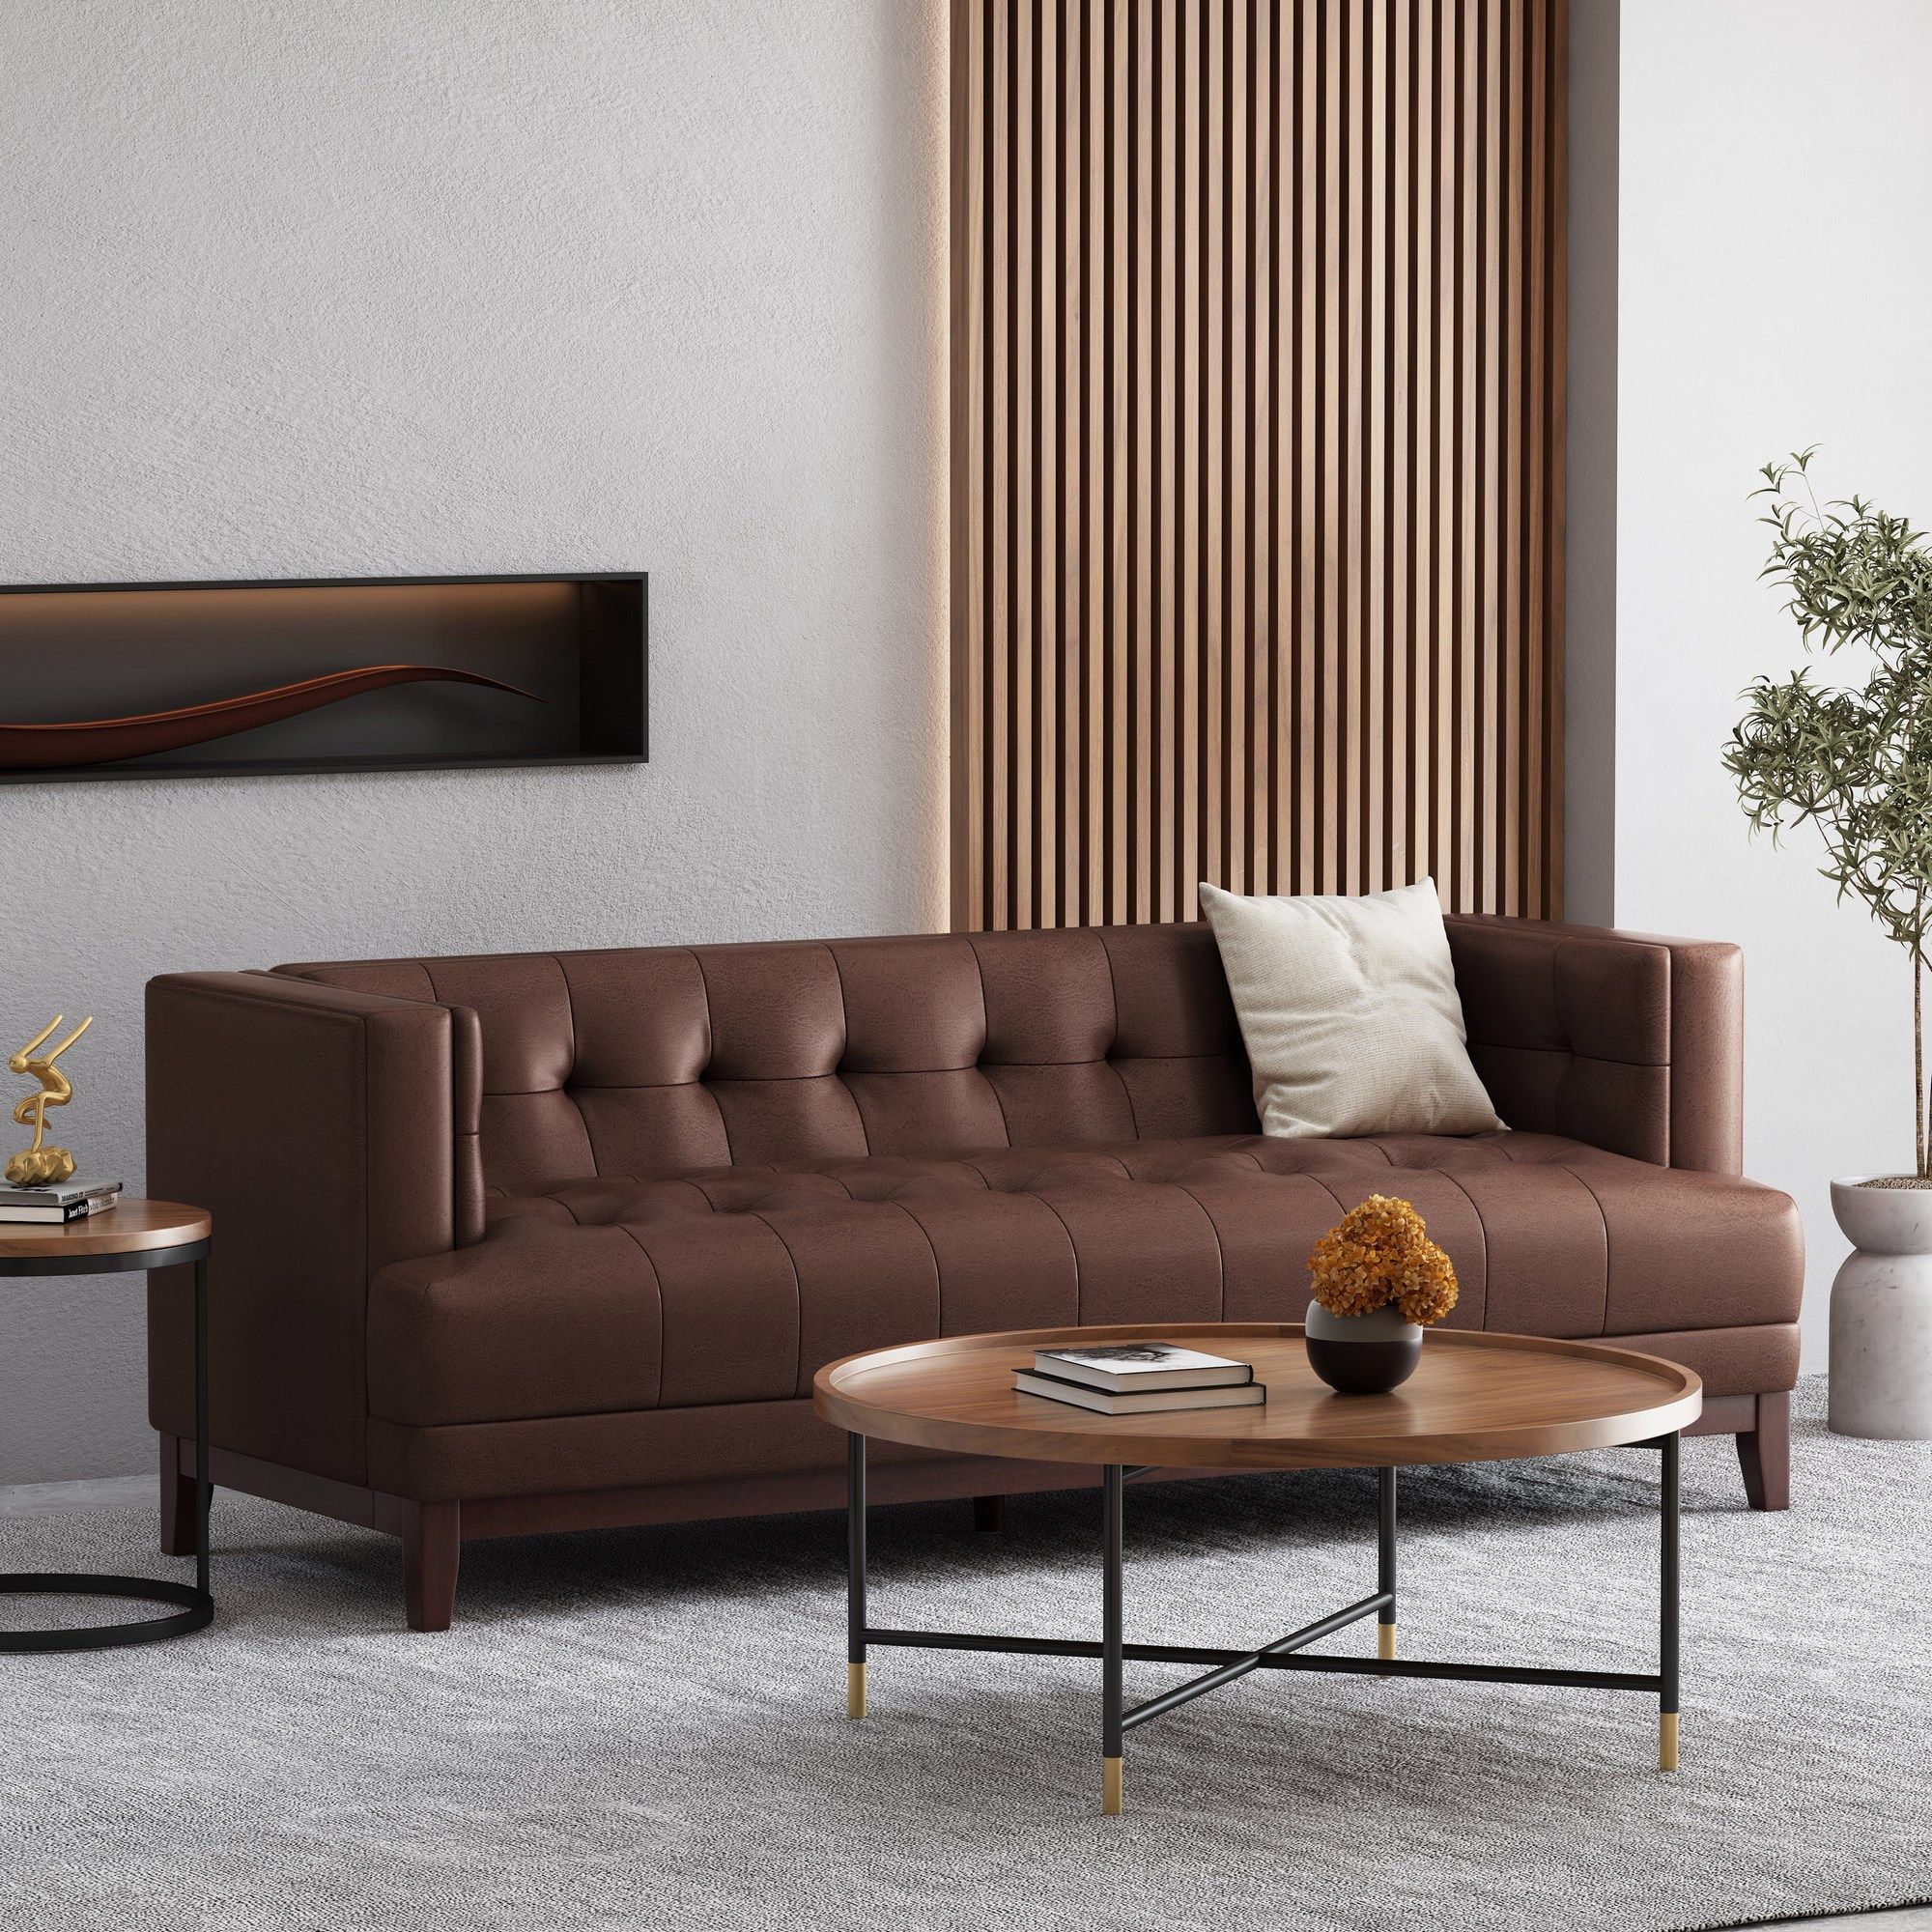 Raintree Mid Century Modern Faux Leather Tufted 3 Seater Sofa, Dark Brown  And Espresso Pertaining To Mid Century 3 Seat Couches (View 11 of 15)